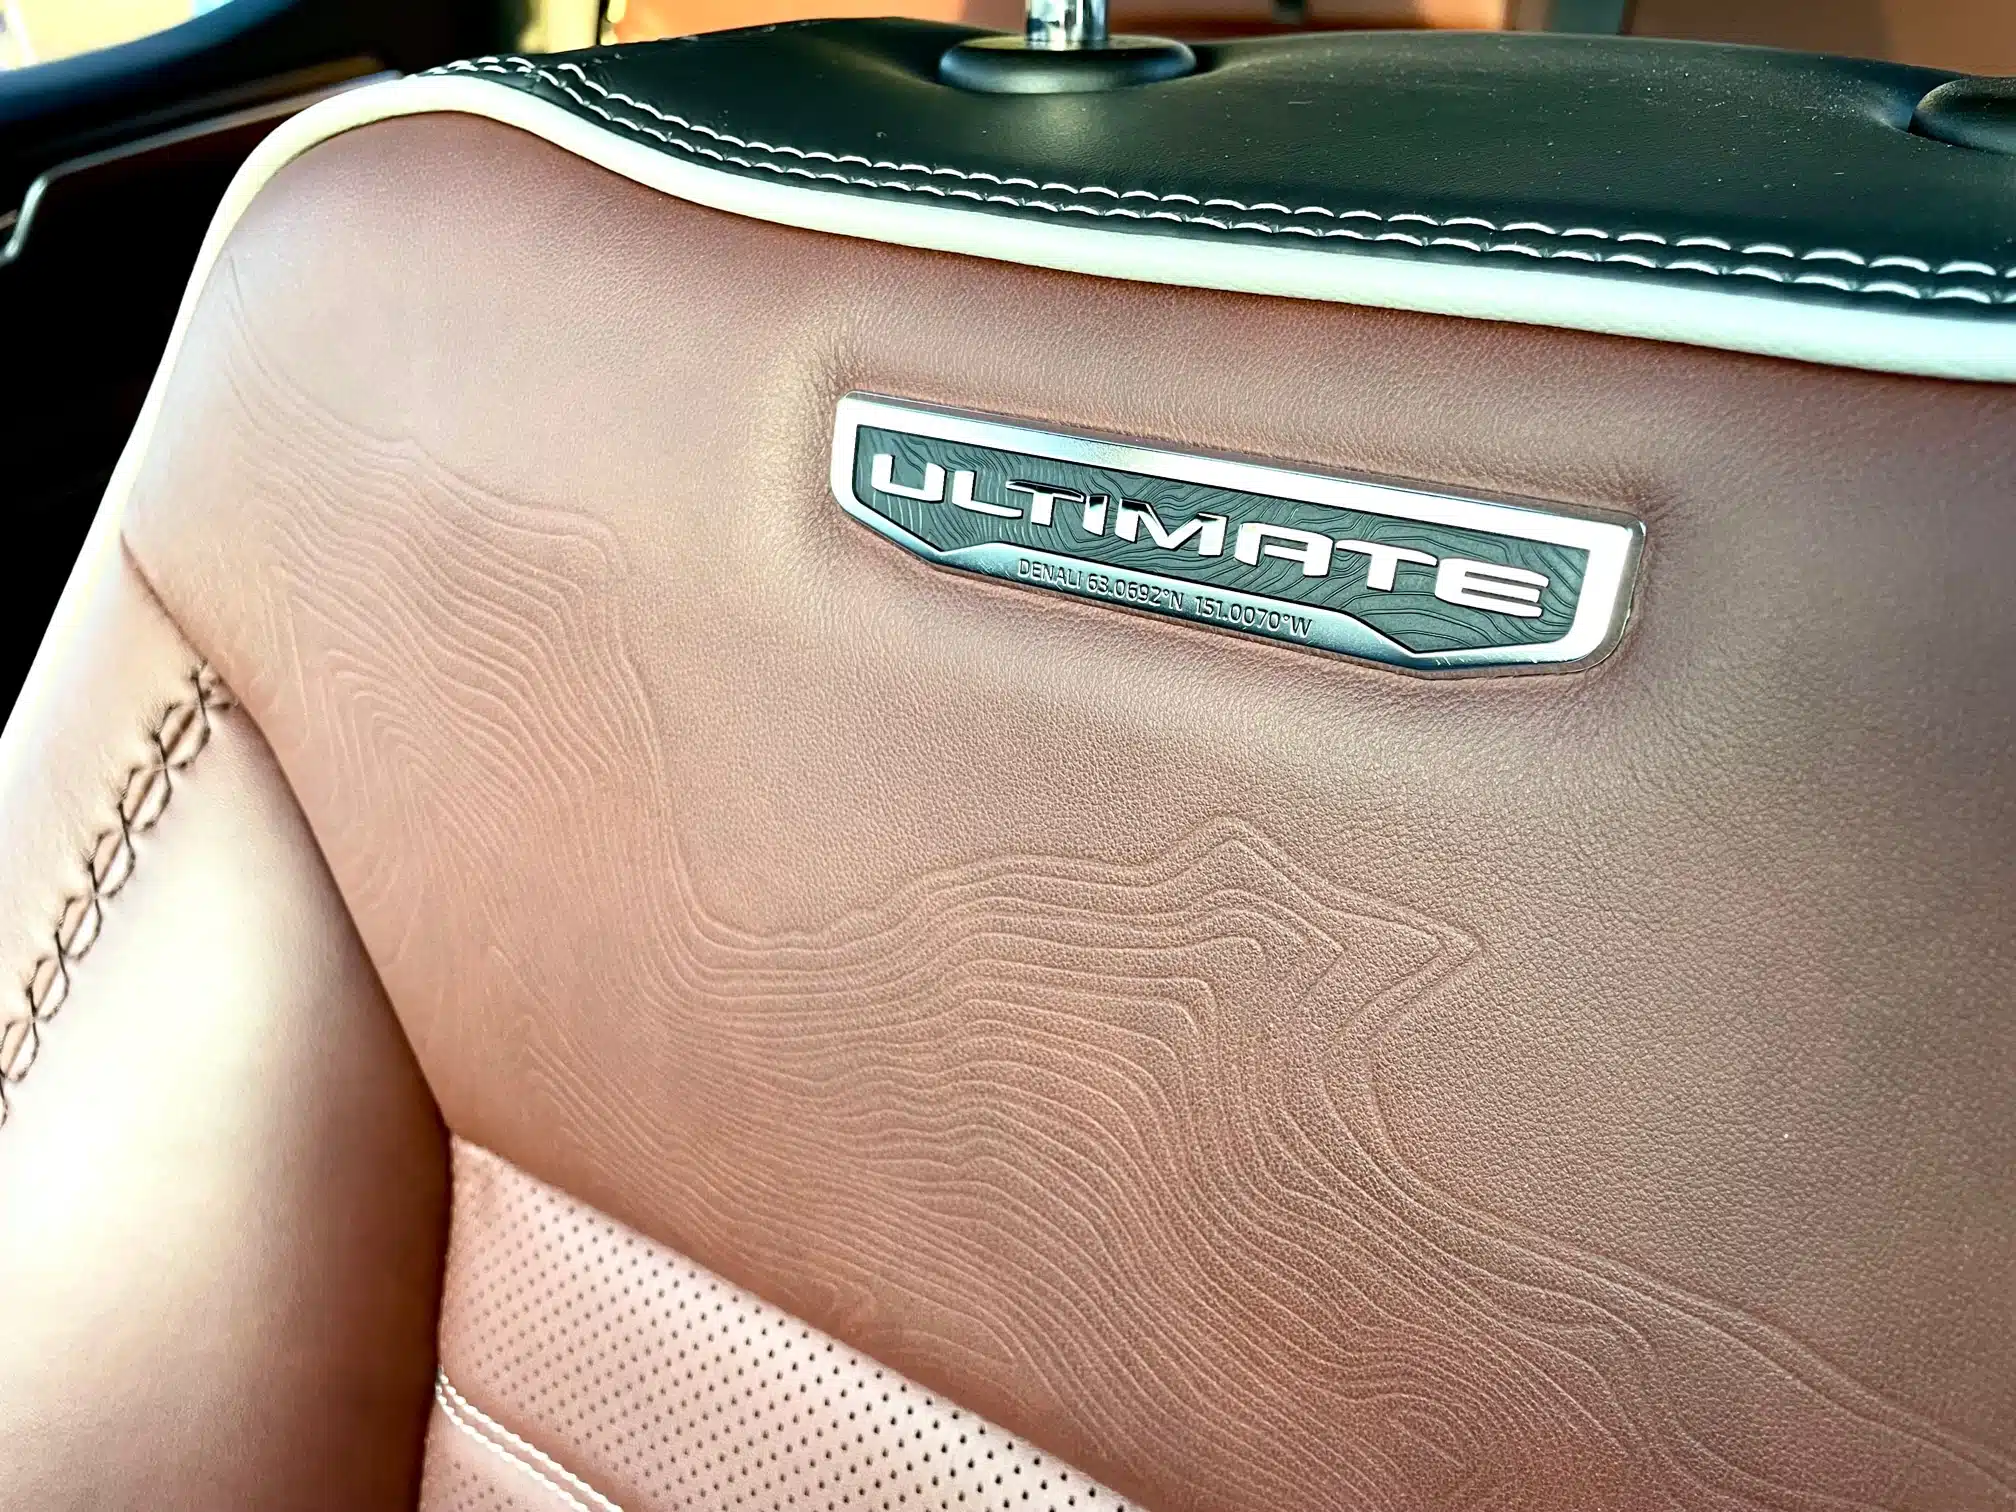 Beauty is in the details: an imprint of Mount Denali in the seats